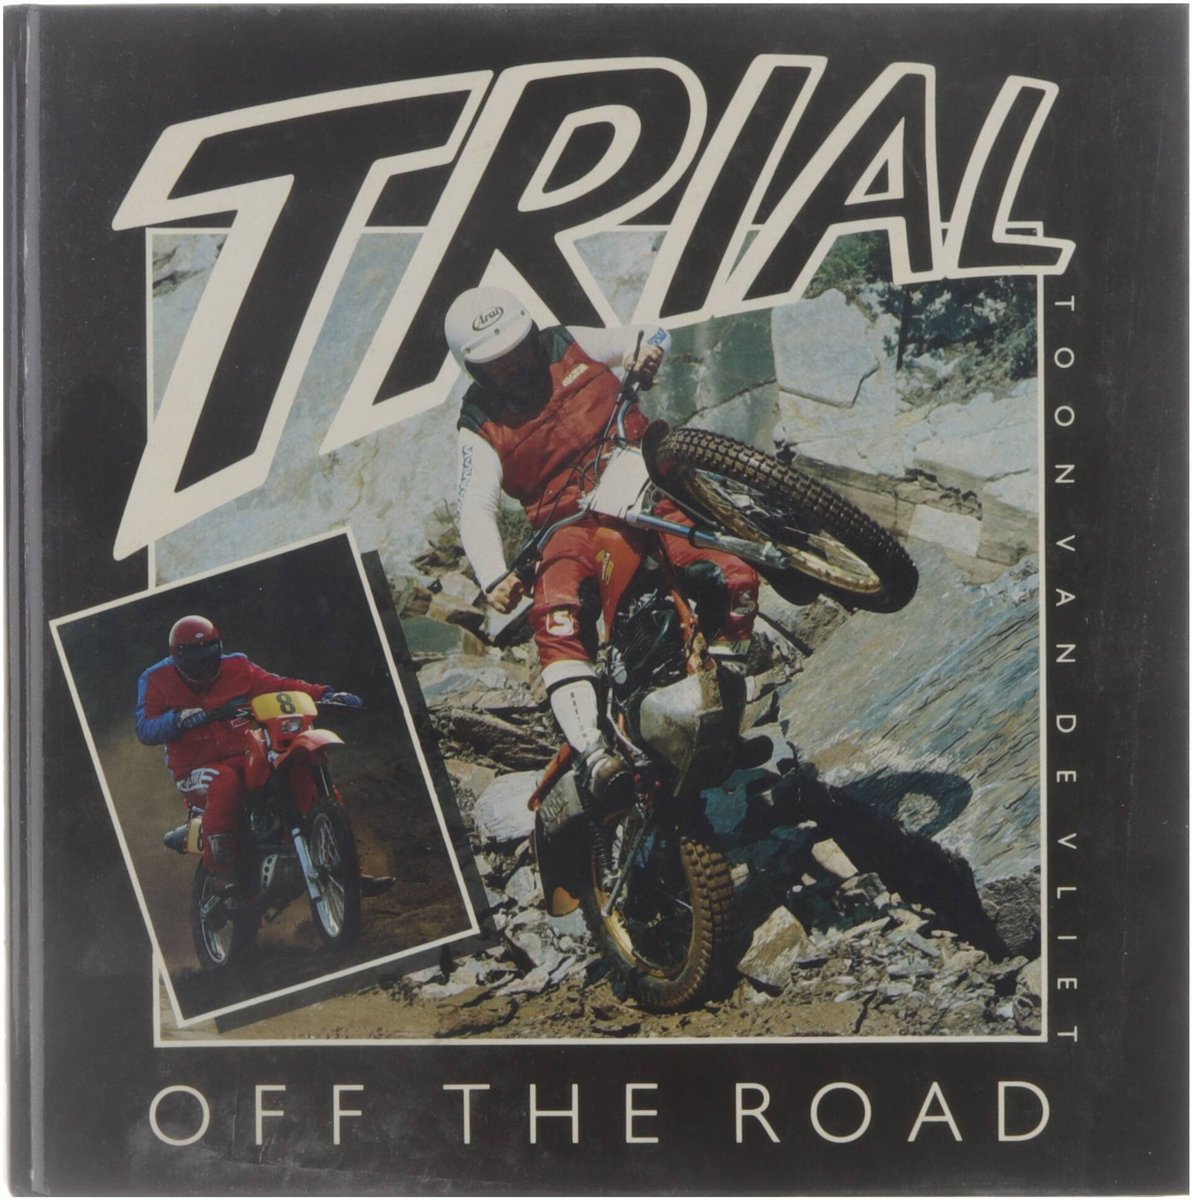 Trial, off the road